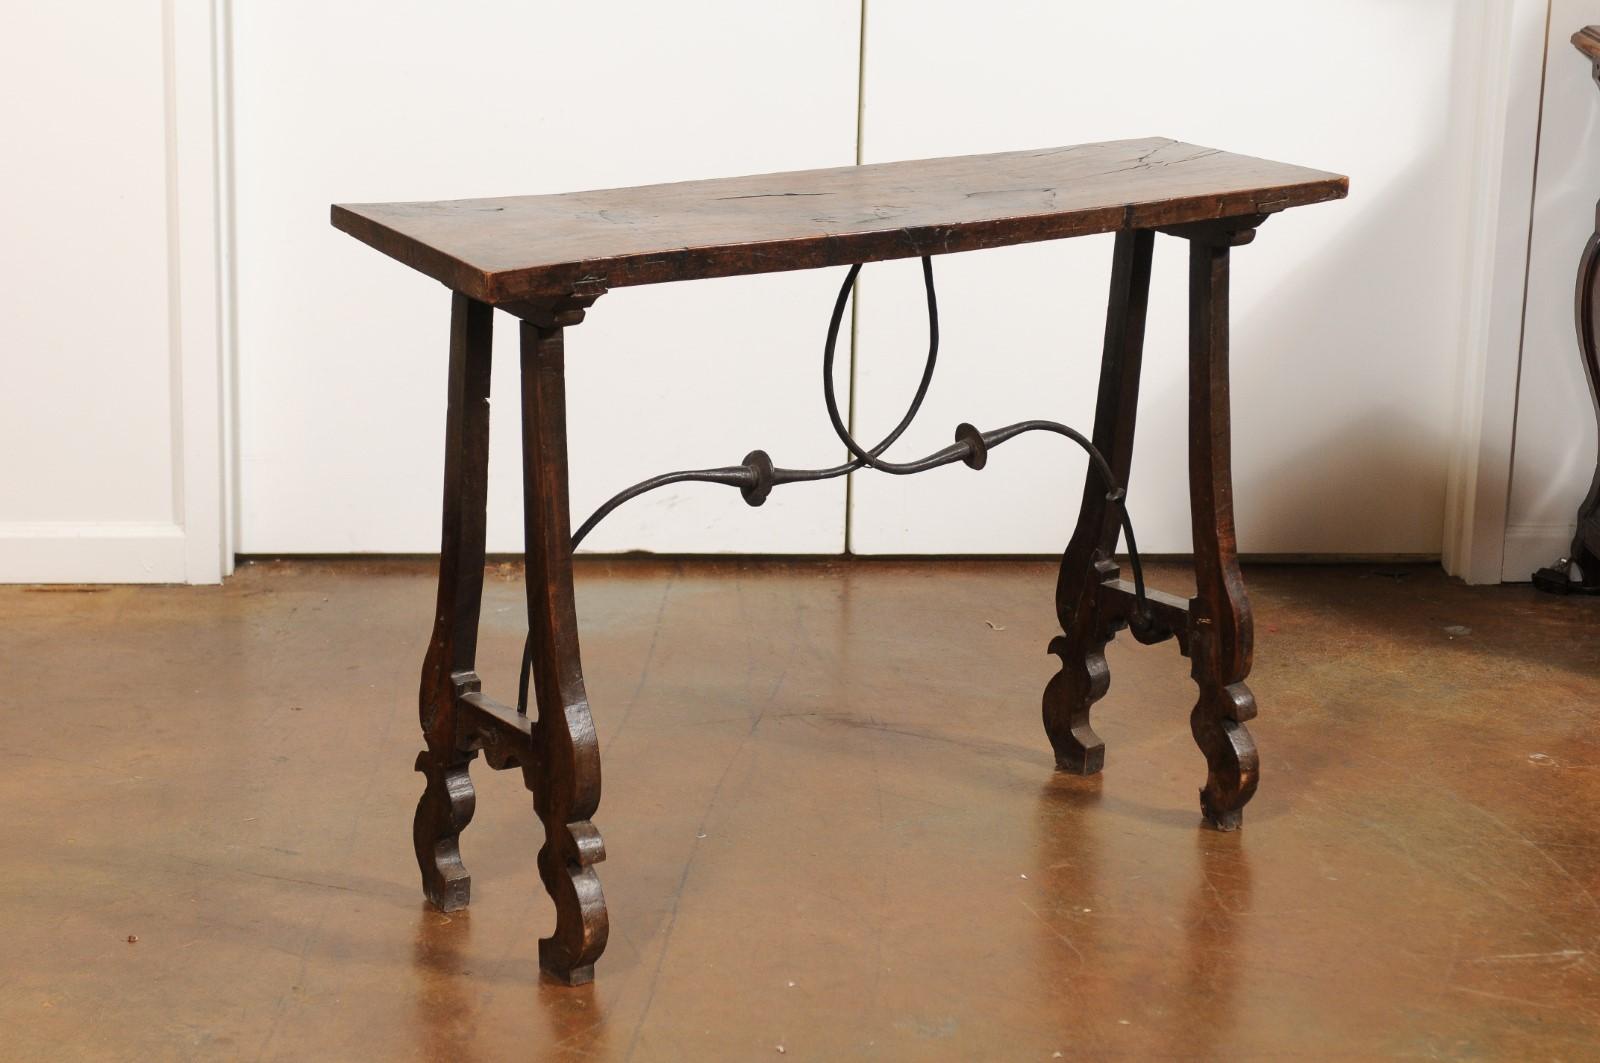 A French Baroque style walnut console table from the 19th century, with lyre-shaped legs and iron stretcher. Born in France during the every-changing 19th century, this console table features an exquisite rectangular single-plank walnut top with a